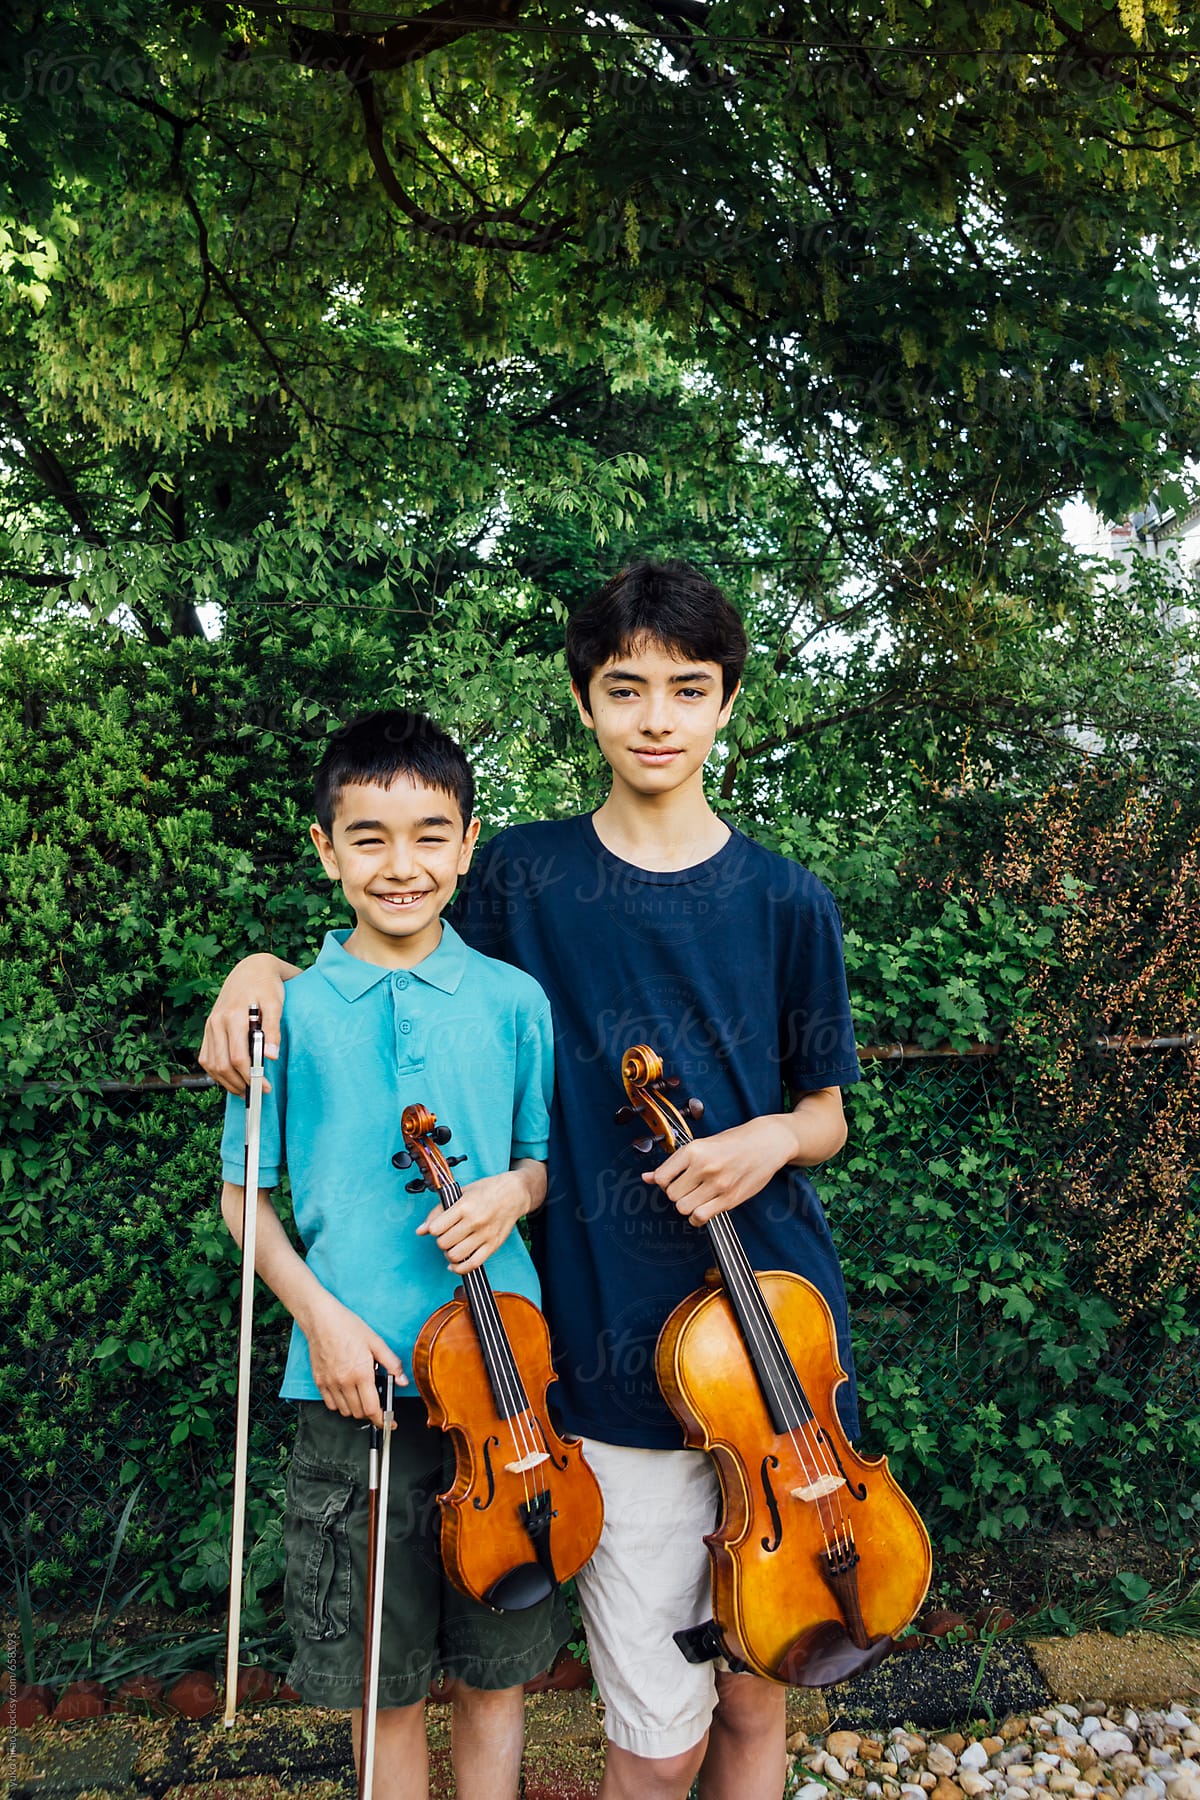 Asian brothers outdoor portrait with viola and violin